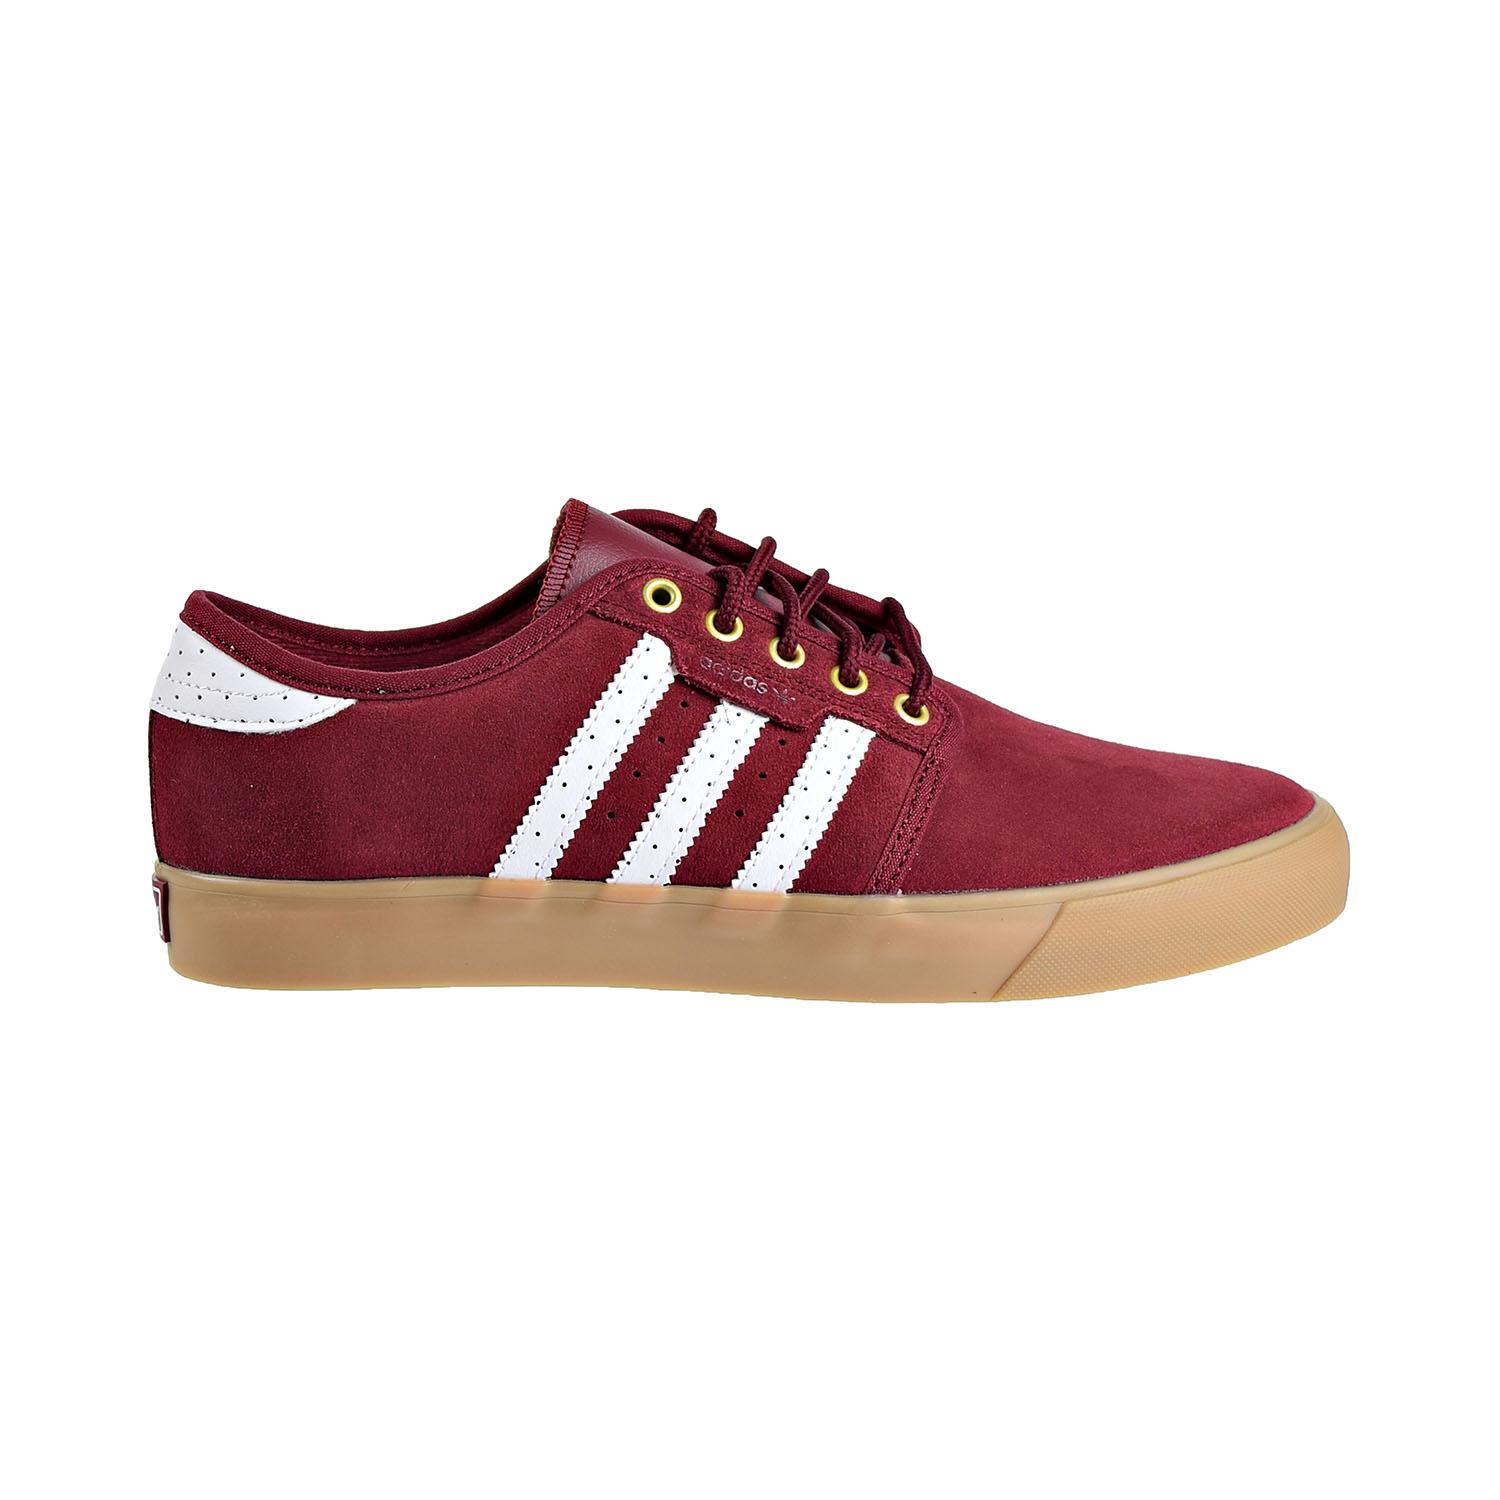 Adidas Seeley Mens Shoes Collegiate 